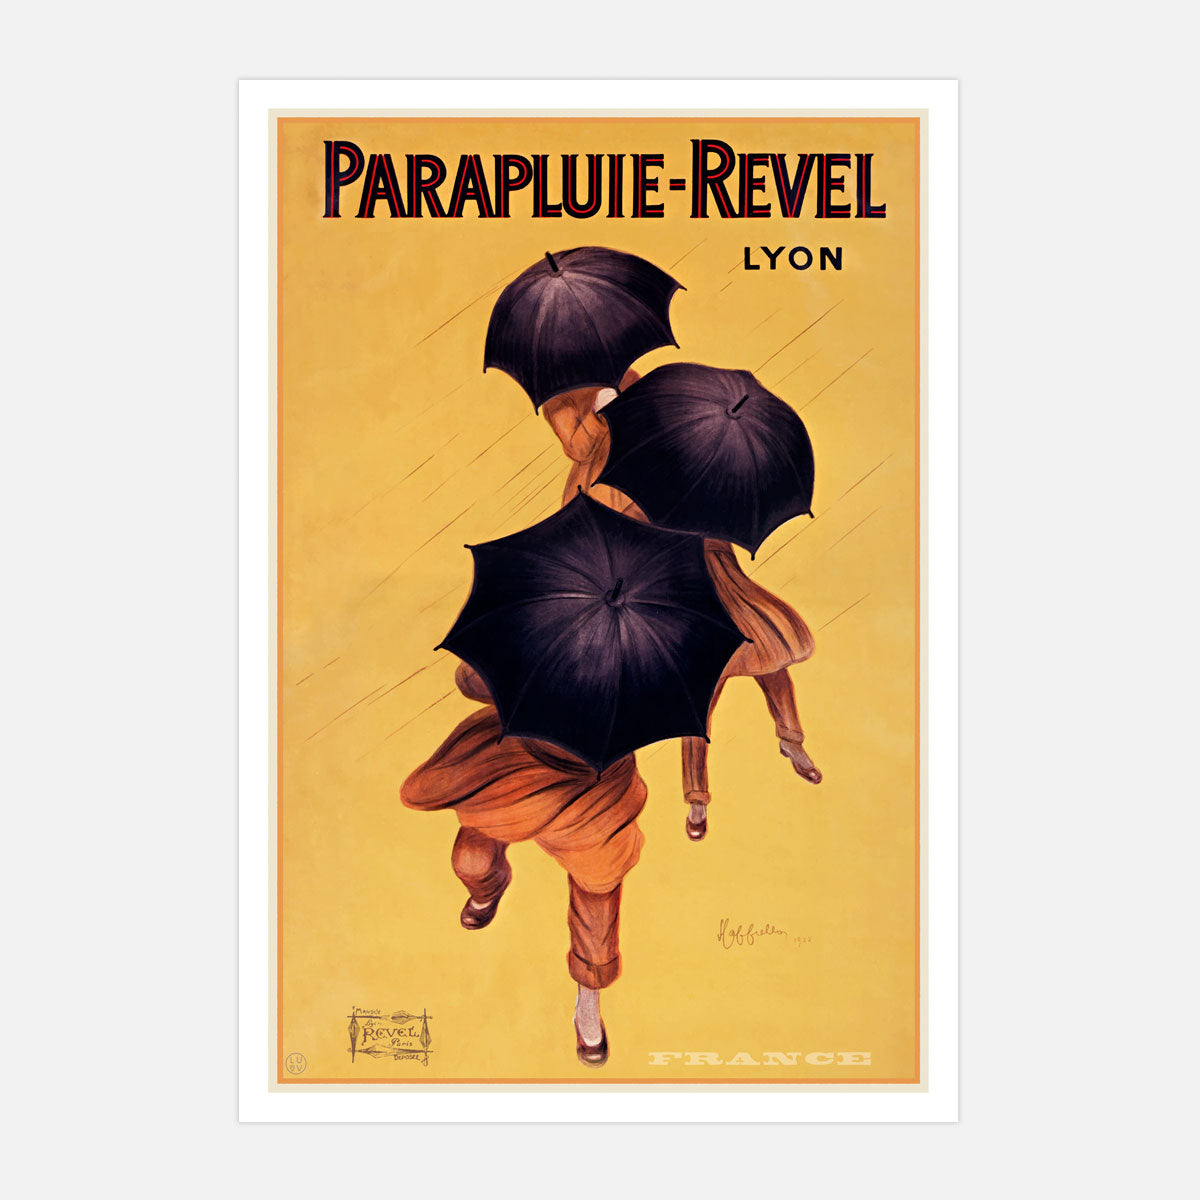 Parapluie Revel French retro advertising poster from Places We Luv